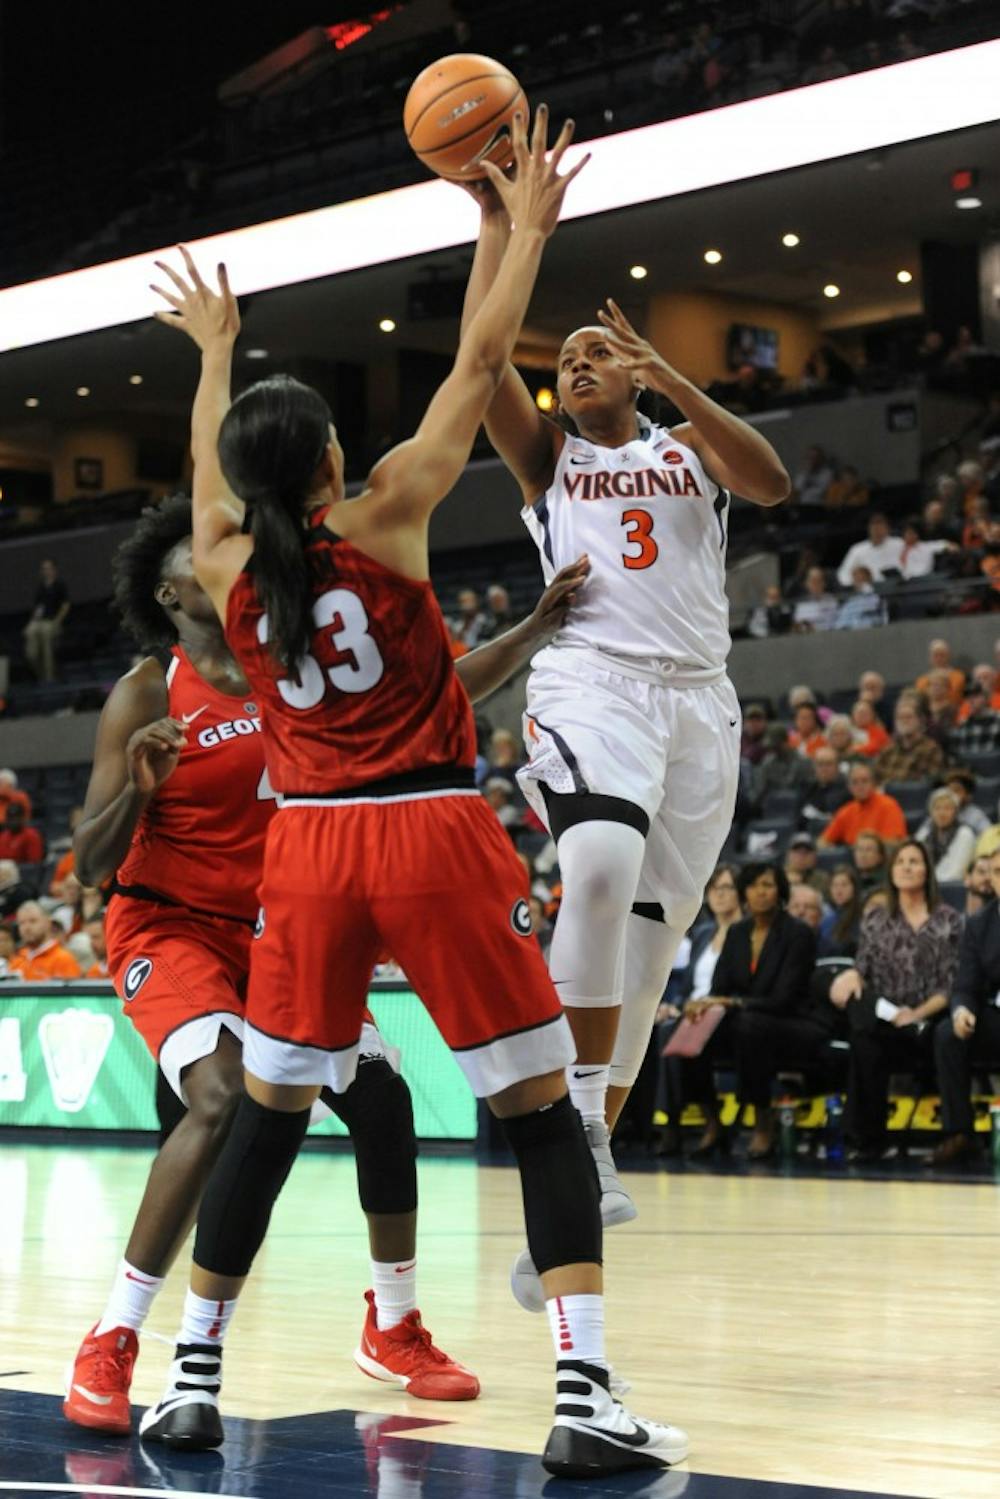 <p>Virginia’s main issue was its lack of rebounding ability, constantly giving up extra chances to the Flyers’ offense and preventing easy transition attempts.</p>